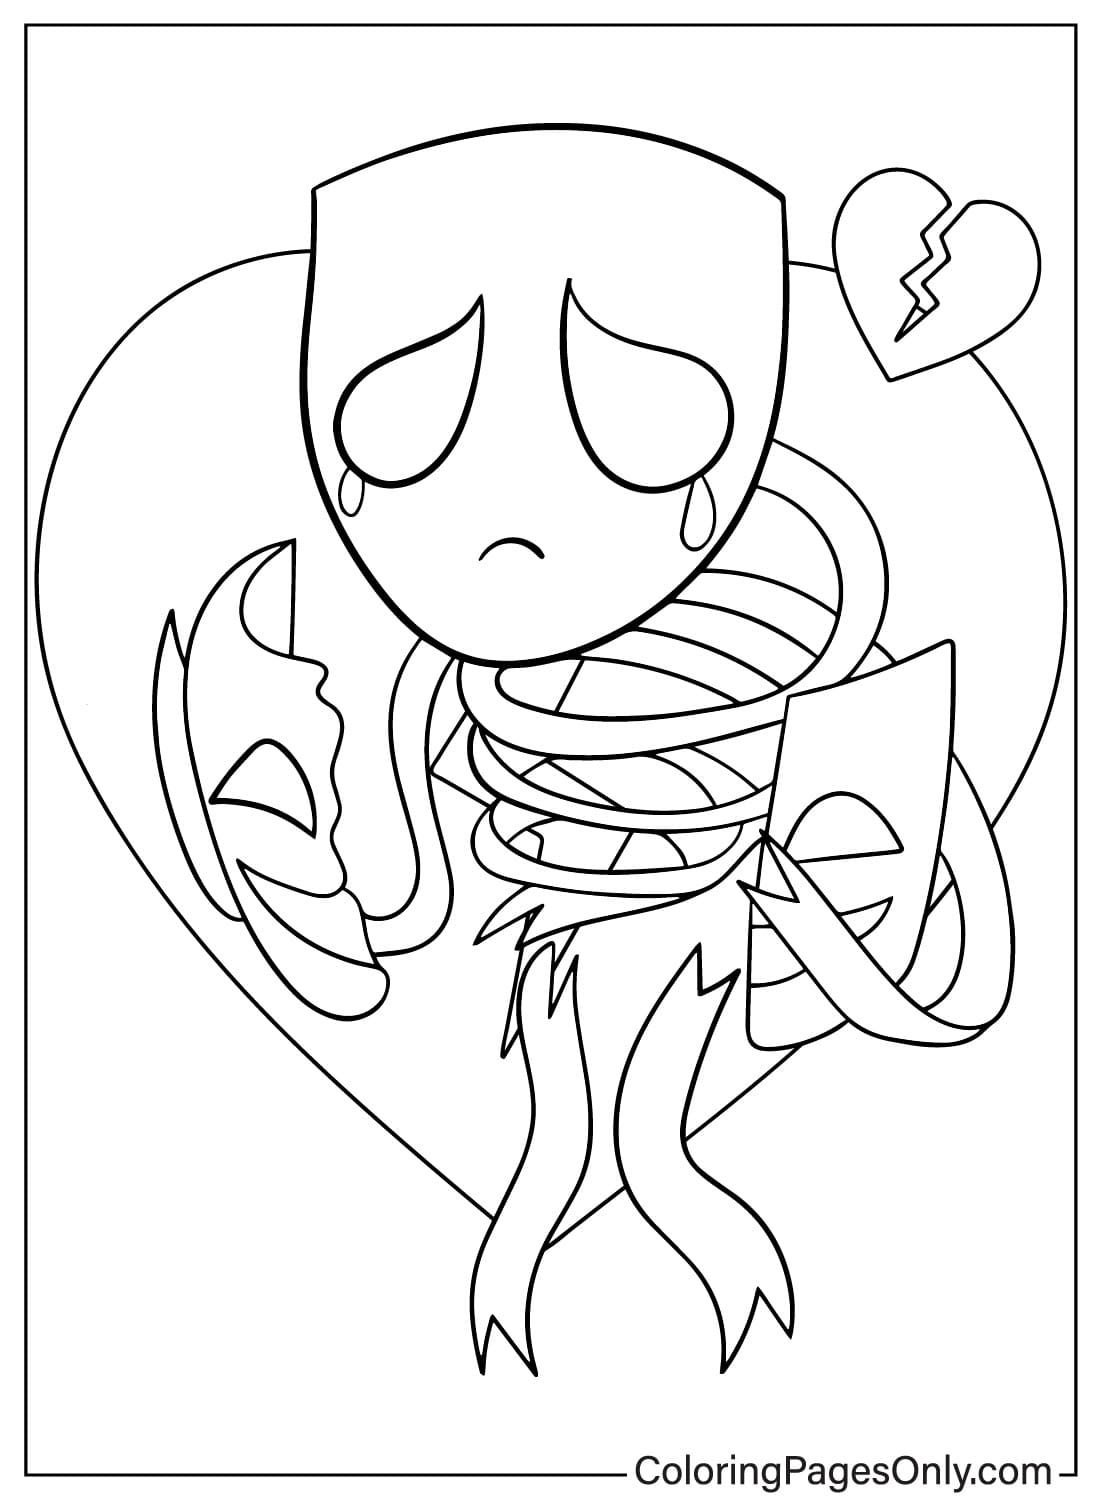 Gangle Coloring Page Free Printable from Gangle